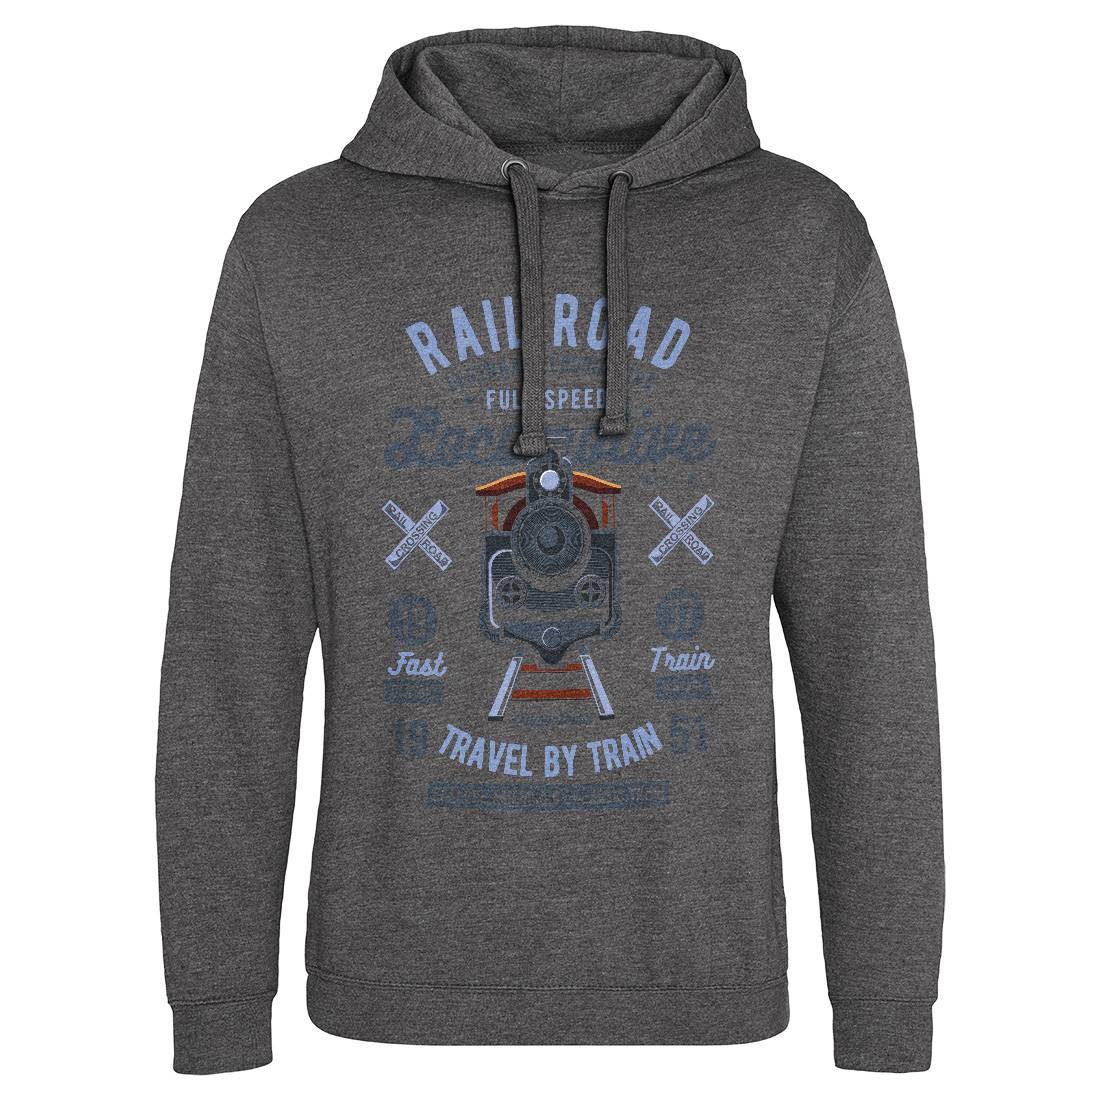 Rail Road Mens Hoodie Without Pocket Vehicles C423